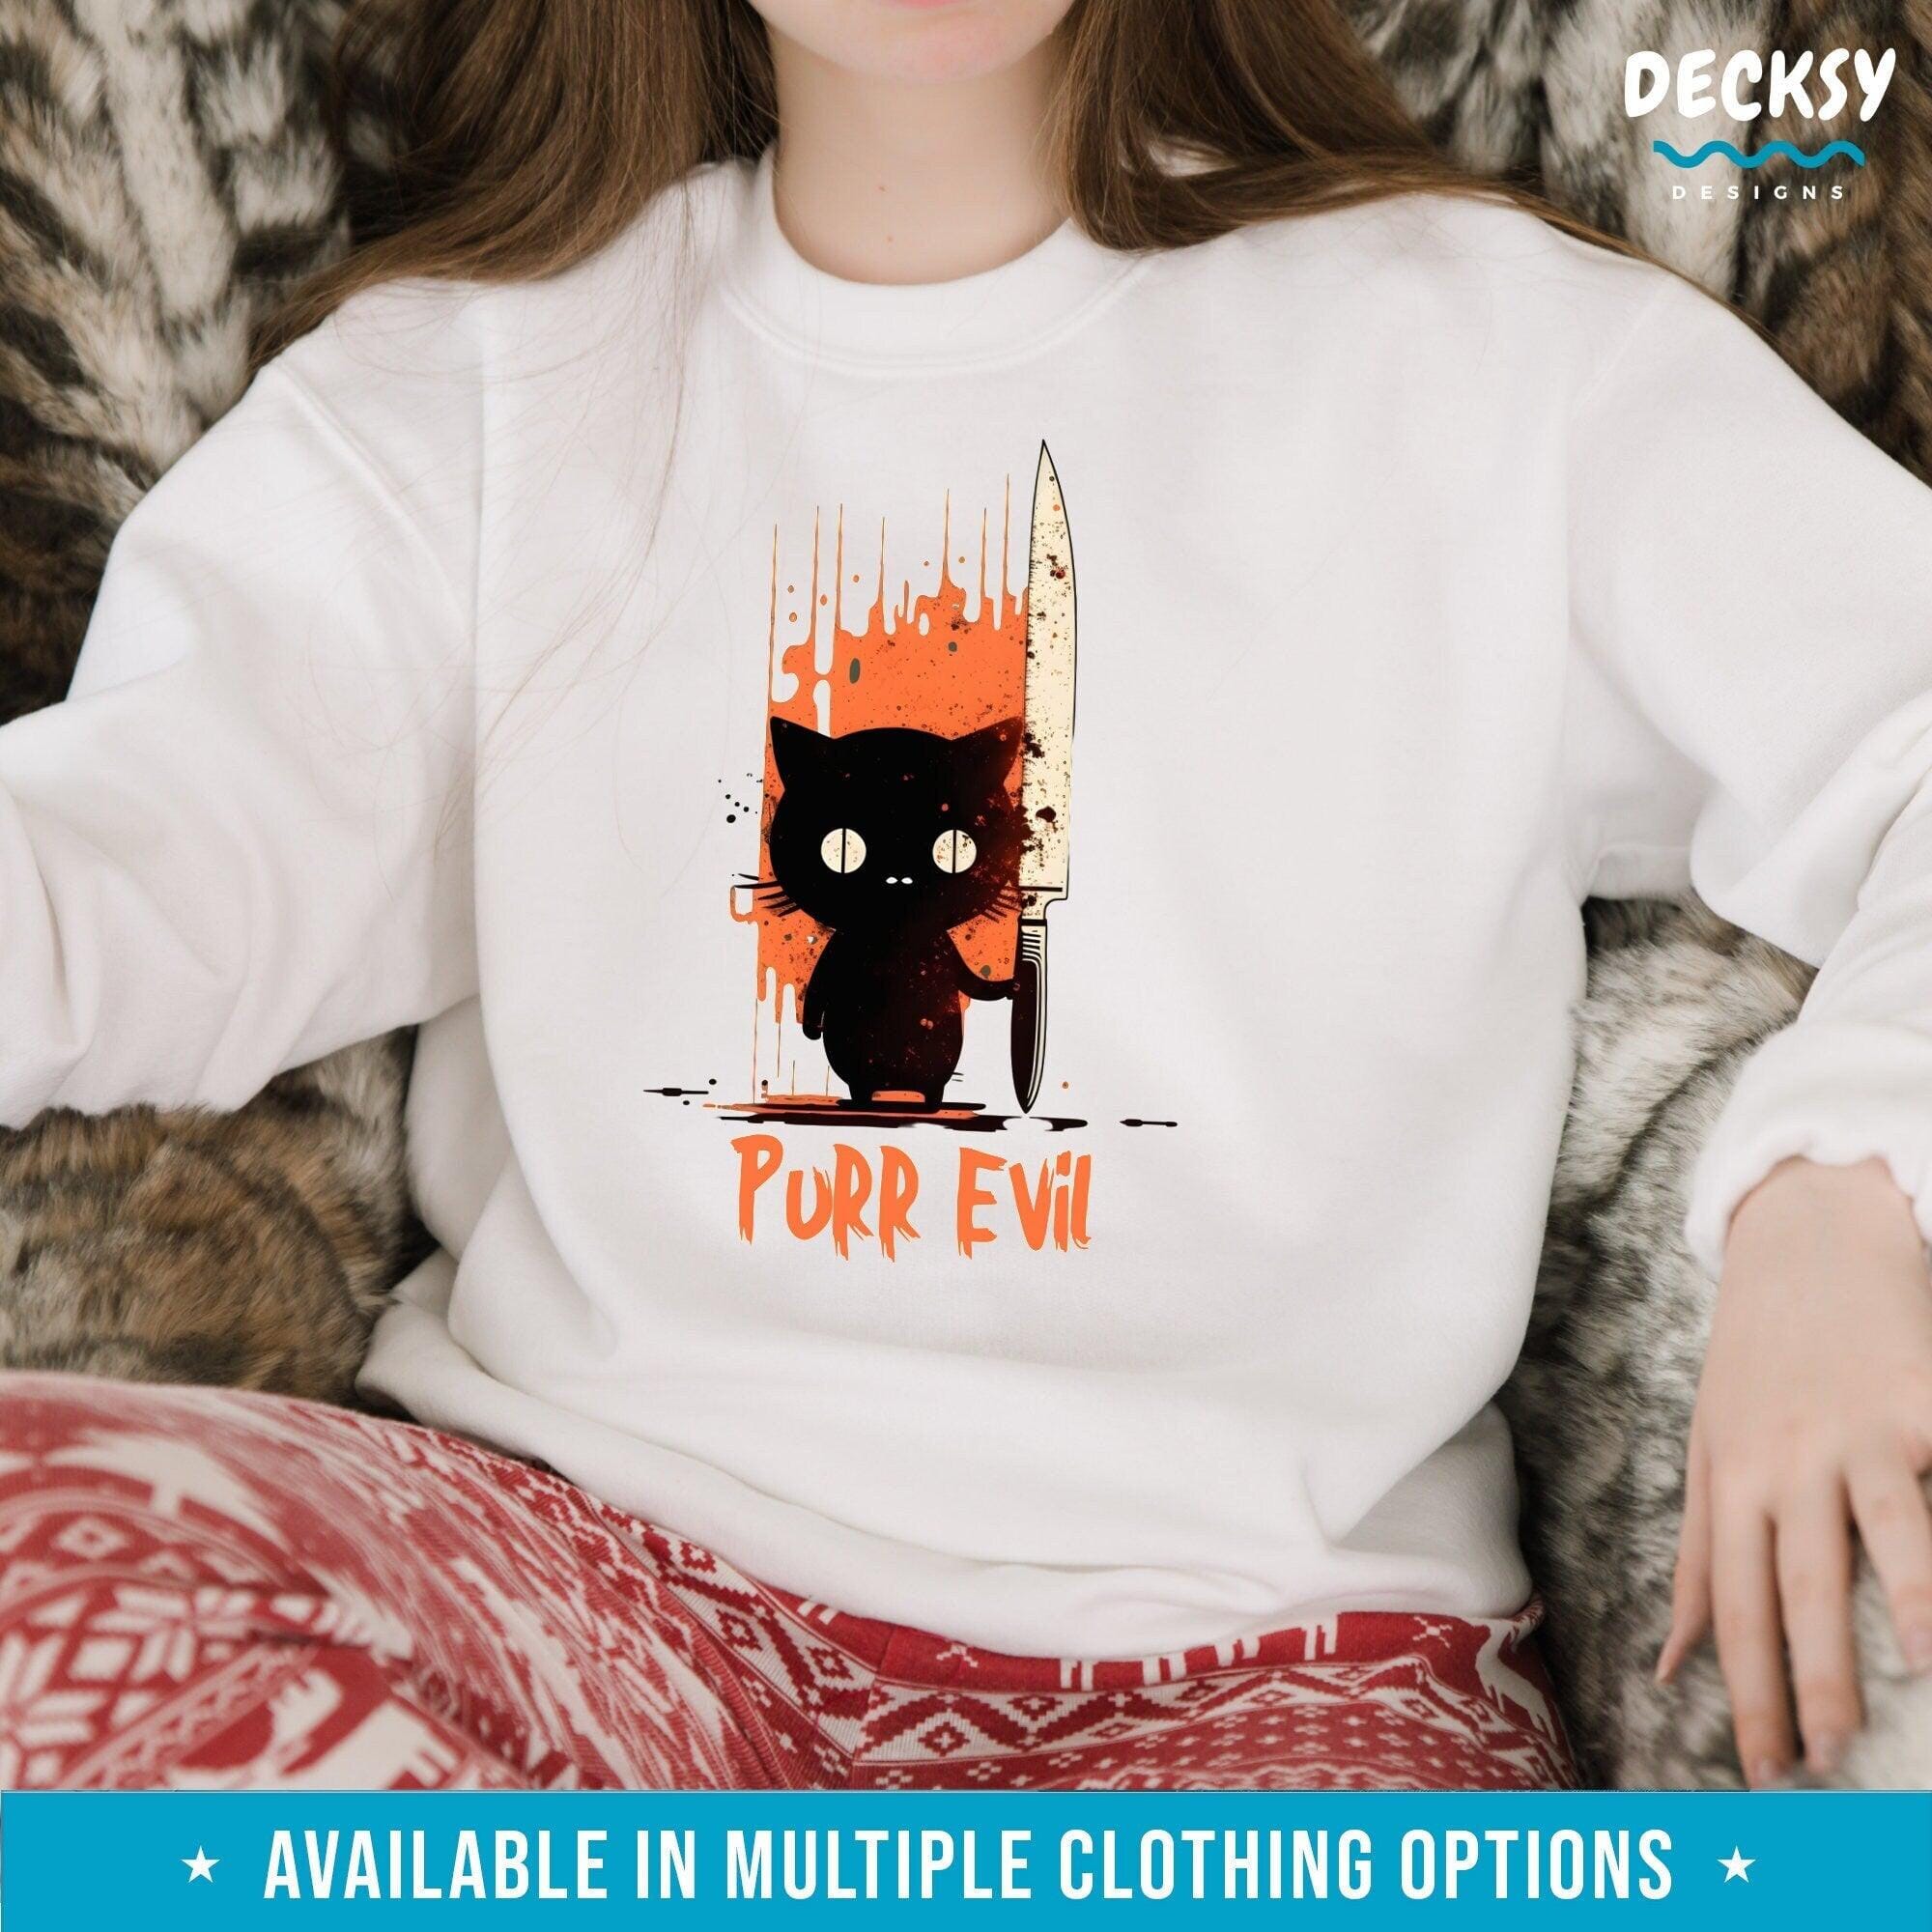 Purr Evil Shirt, Funny Cat Lover Gift-Clothing:Gender-Neutral Adult Clothing:Tops & Tees:T-shirts:Graphic Tees-DecksyDesigns